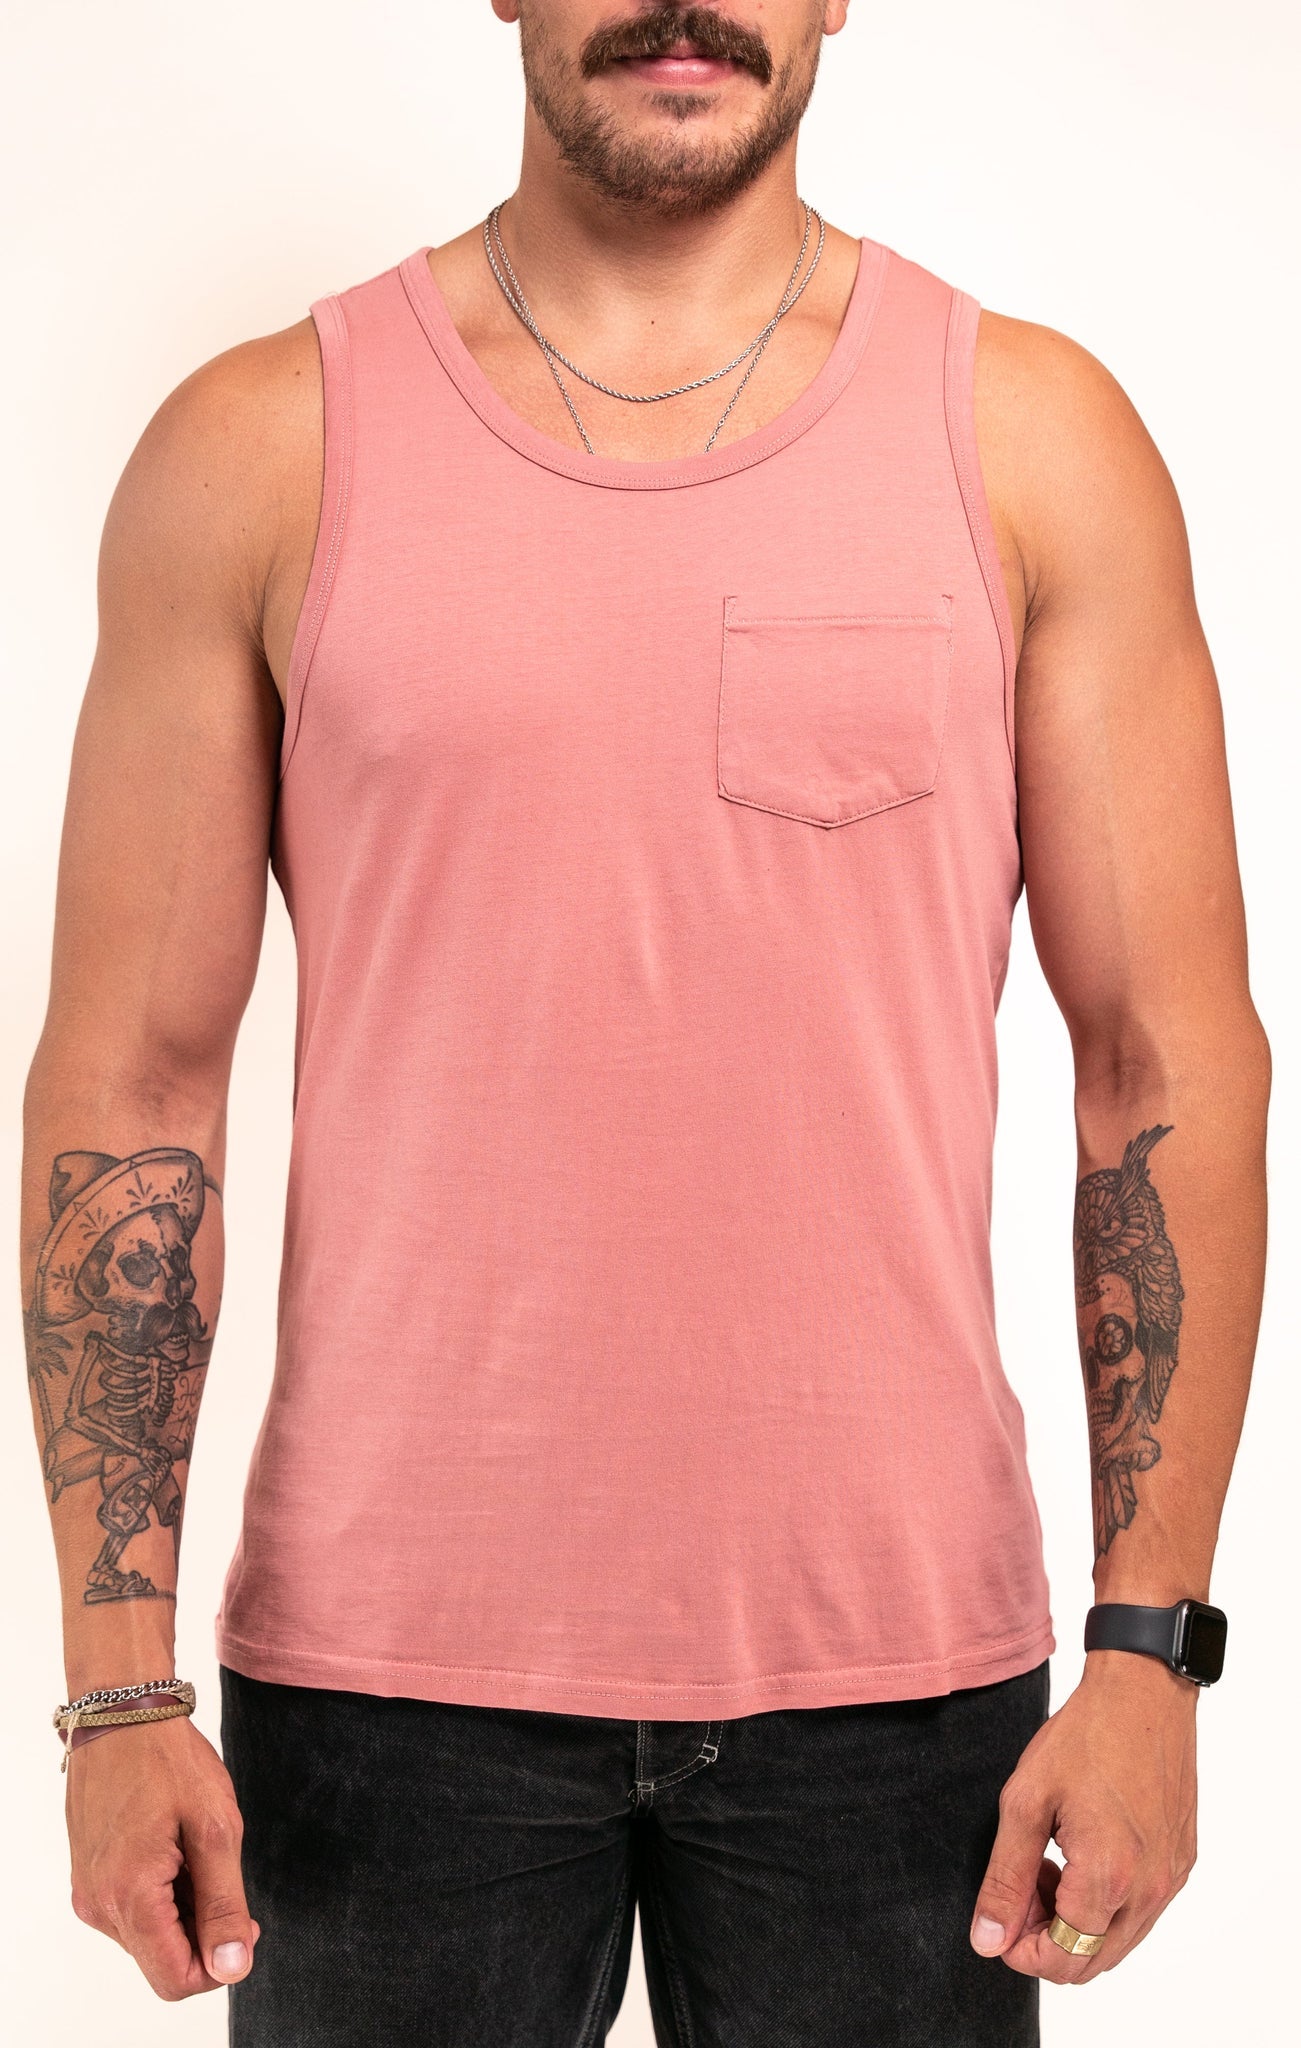 STST21 - Pigment Dyed Tanks Dusty Rose / S